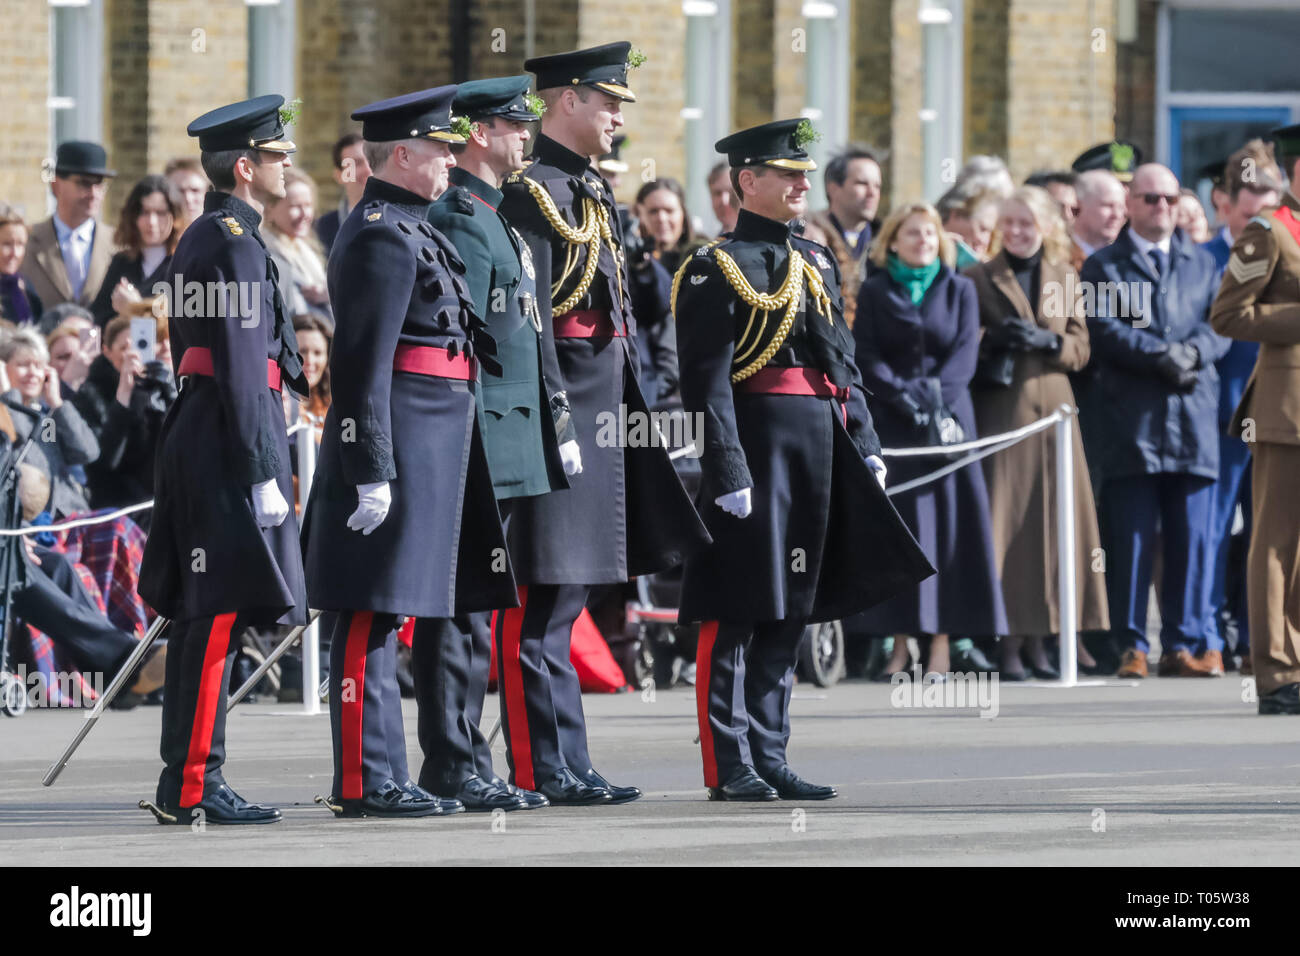 London, UK. 17th March 2019. London, UK. 17th March 2019. HRH Prince William, Duke of Cambridge, Colonel of the Irish Guards, and HRH Catherine, Duchess of Cambridge, attending the St Patrick's Day Parade at Cavalry Barracks in Hounslow, home of The 1st Battalion Irish Guards. Credit: Chris Aubrey/Alamy Live News Credit: Chris Aubrey/Alamy Live News Stock Photo